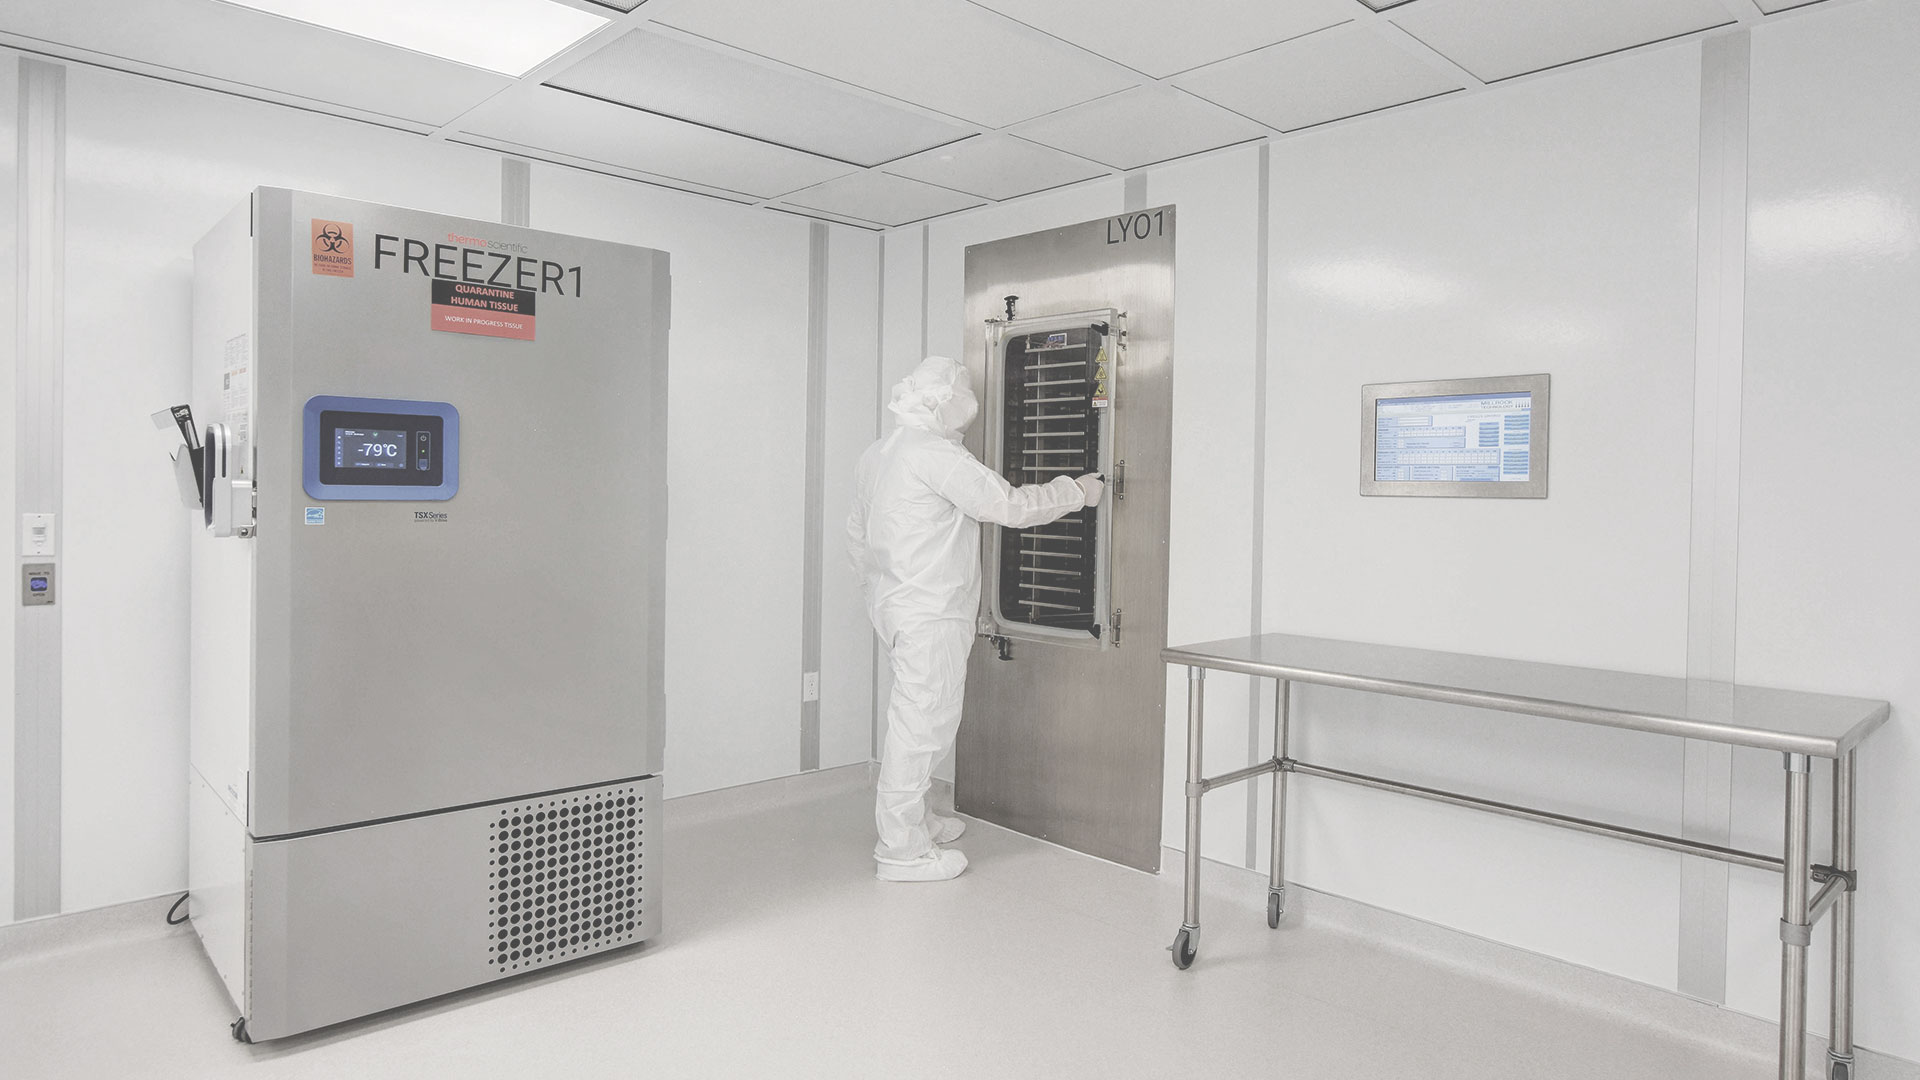 Cleanrooms and diverse industries Clean room by Allied Cleanrooms - USP 797, and ISO 4, ISO 5, ISO 6, ISO 7, and IS0 8, cGMP cleanroom manufacturing, soft wall cleanrooms FED-STD-209E and ISO 14644-1, control contamination